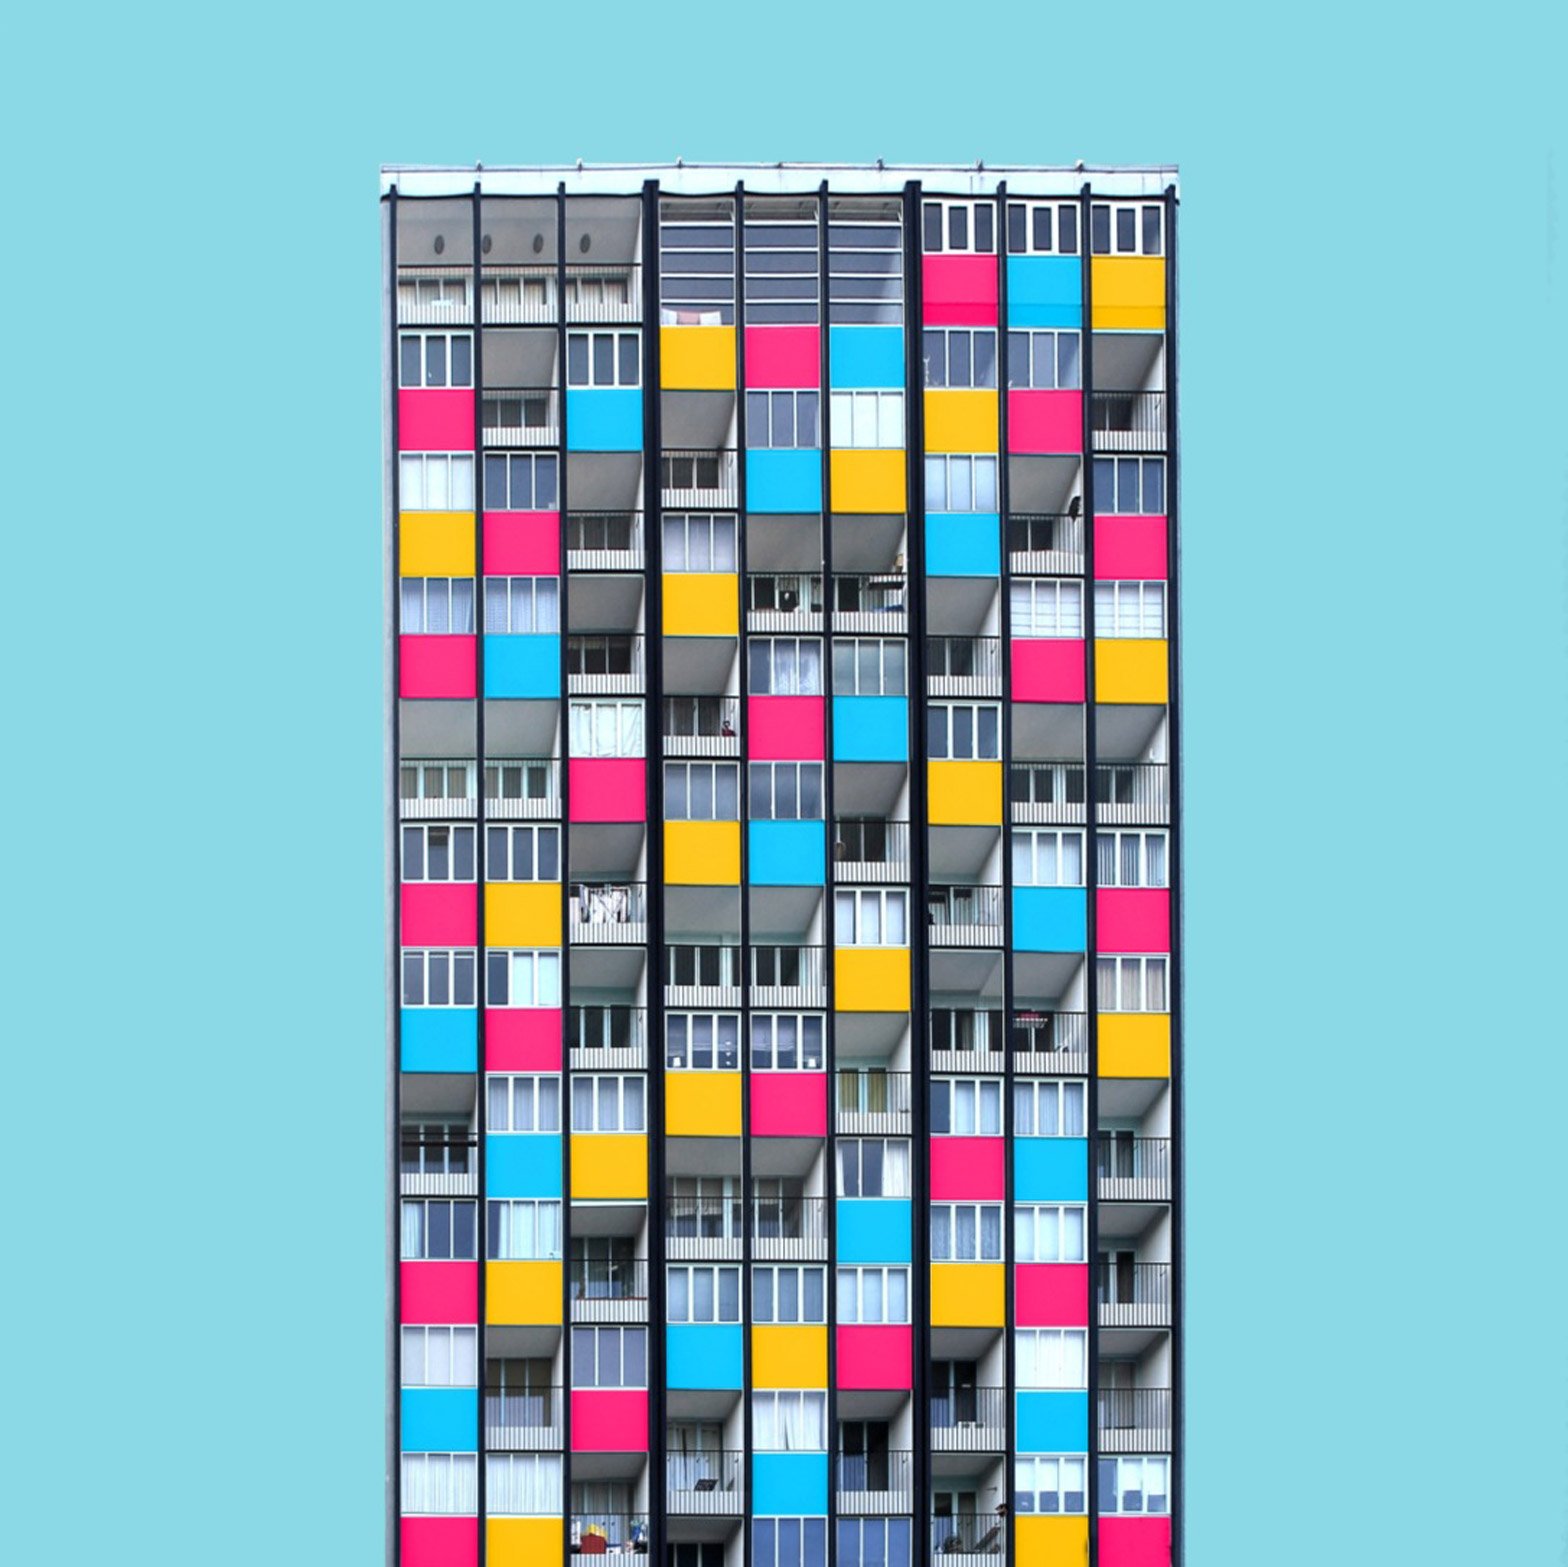 Colourful Berlin: Photography architecture essay by Paul Eis from Germany